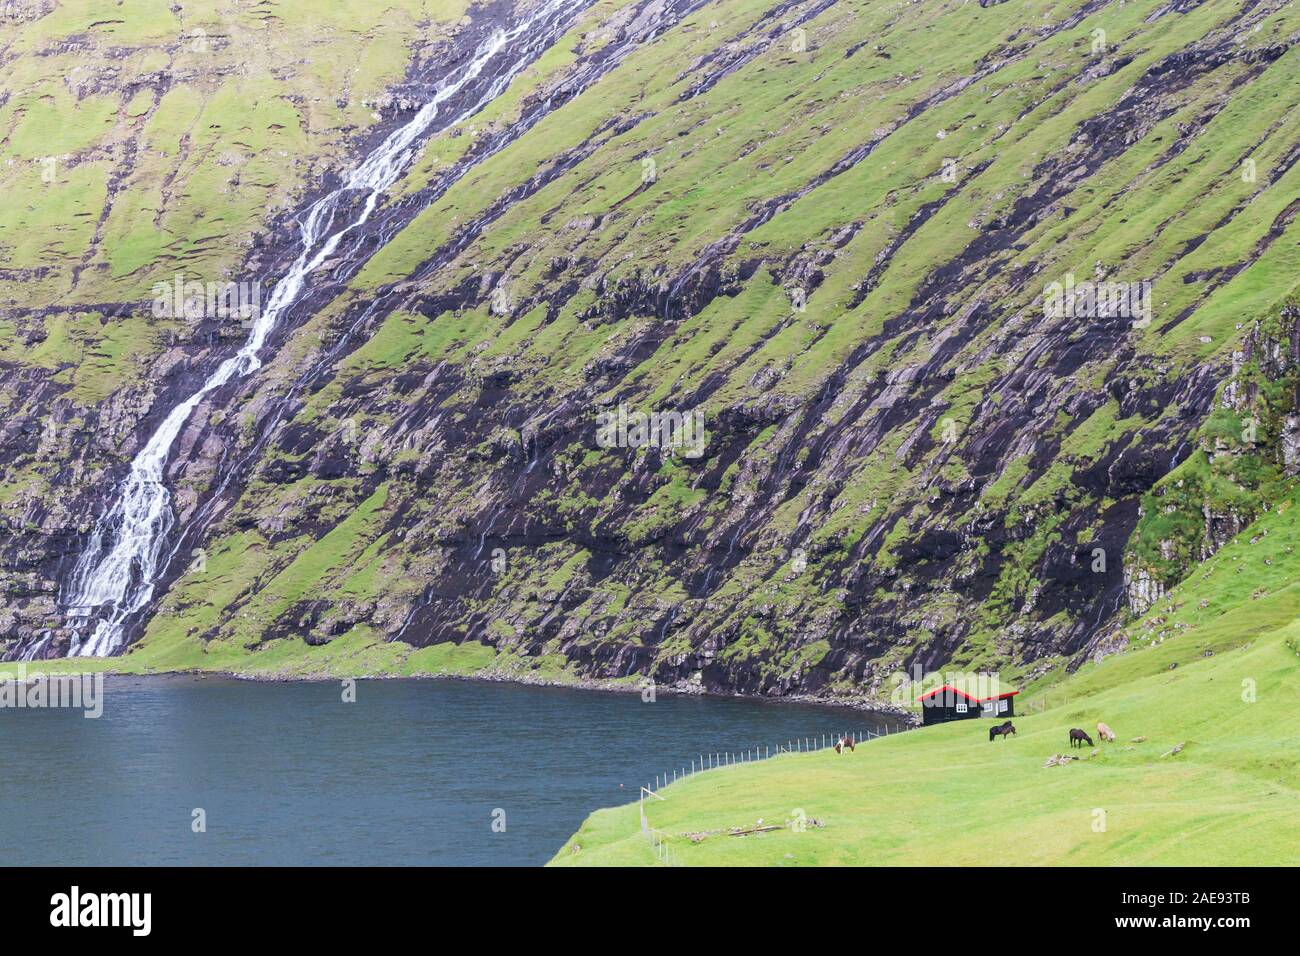 Saksun, Stremnoy island, Faroe Islands, Denmark. Iconic house with grass roof in front of the fiord. Stock Photo